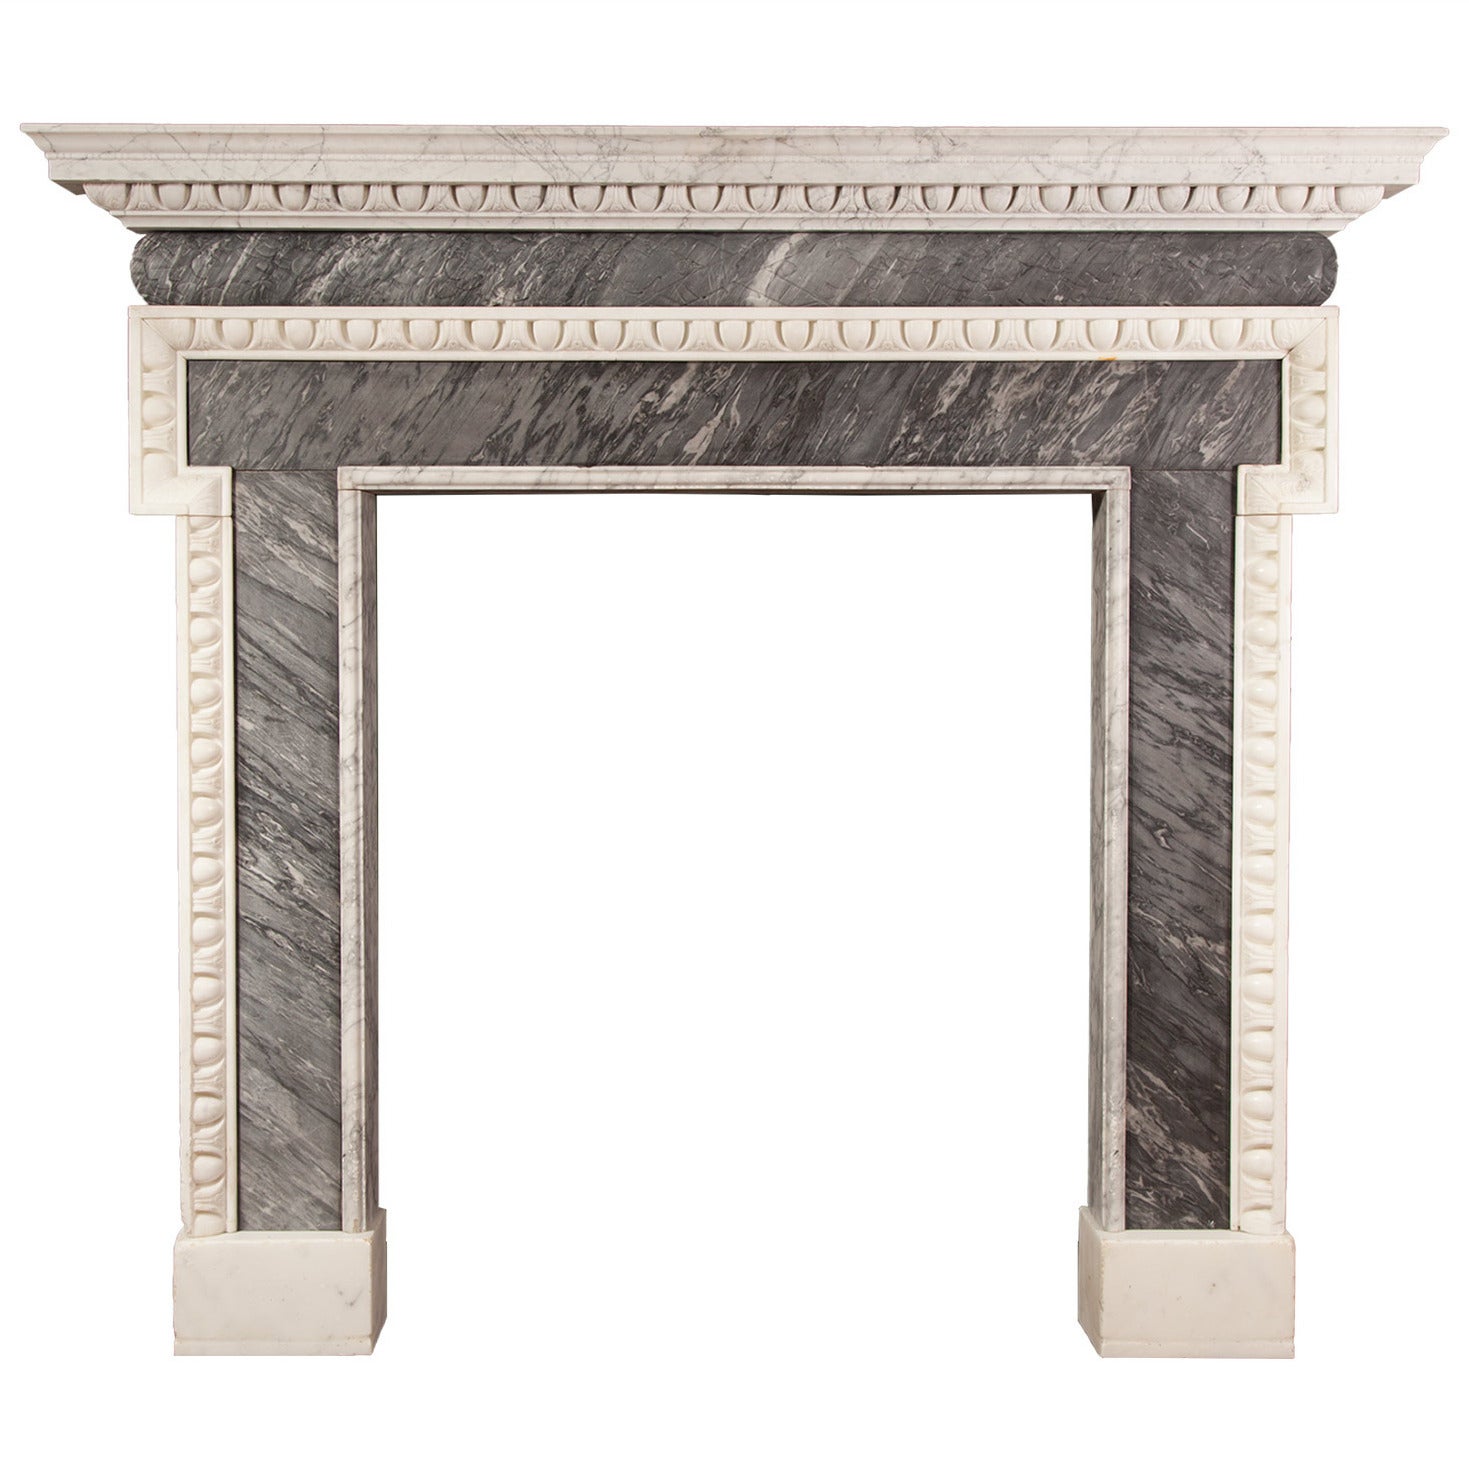 Antique Mantel from the George II Period in the Manner of Batty Langley